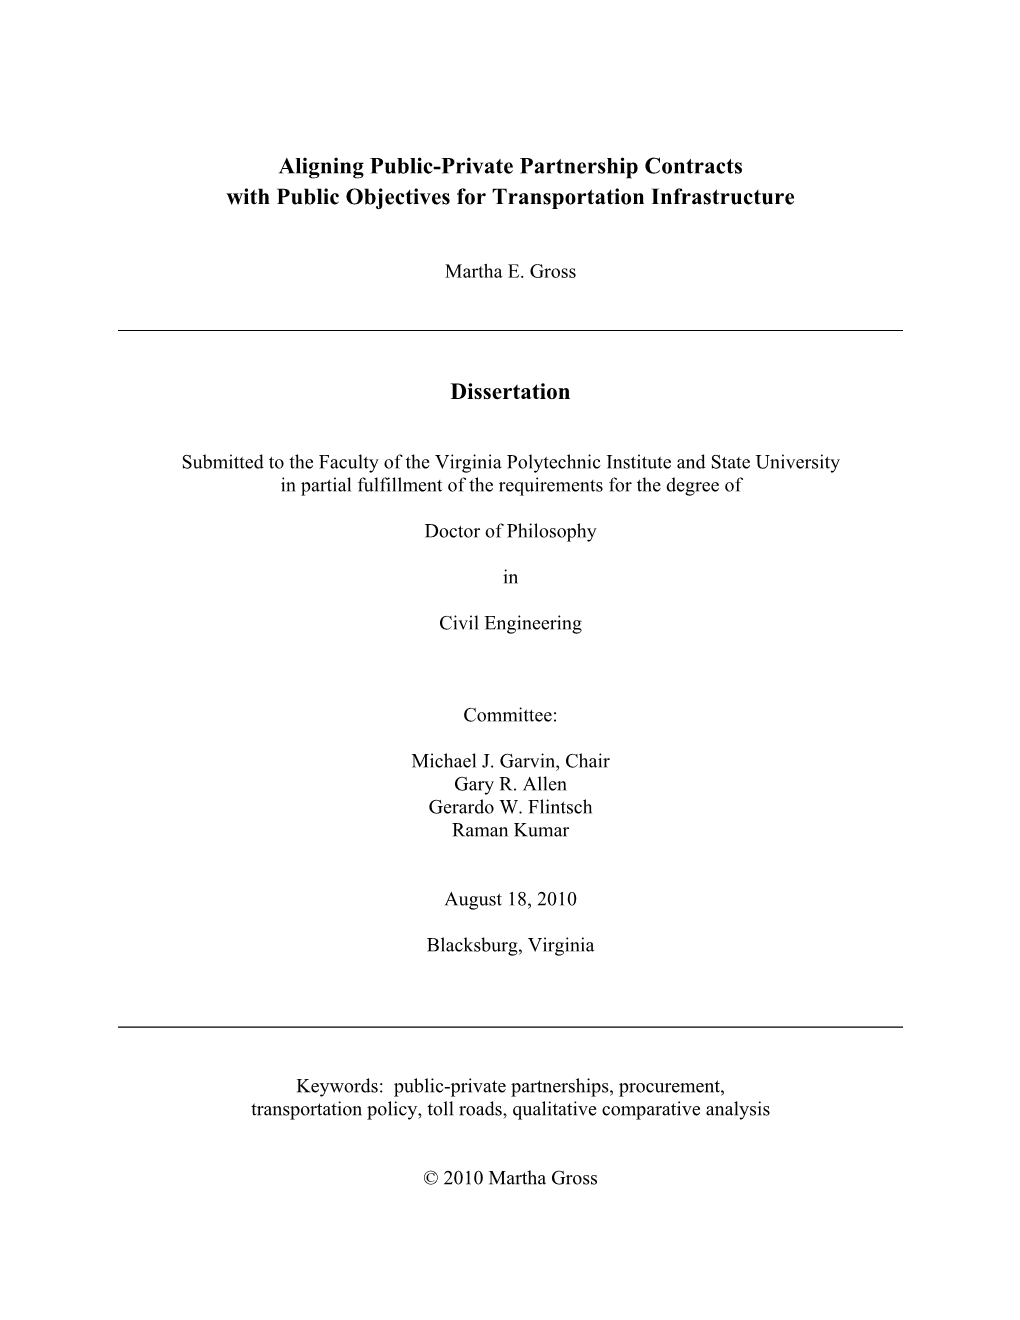 Aligning Public-Private Partnership Contracts with Public Objectives for Transportation Infrastructure